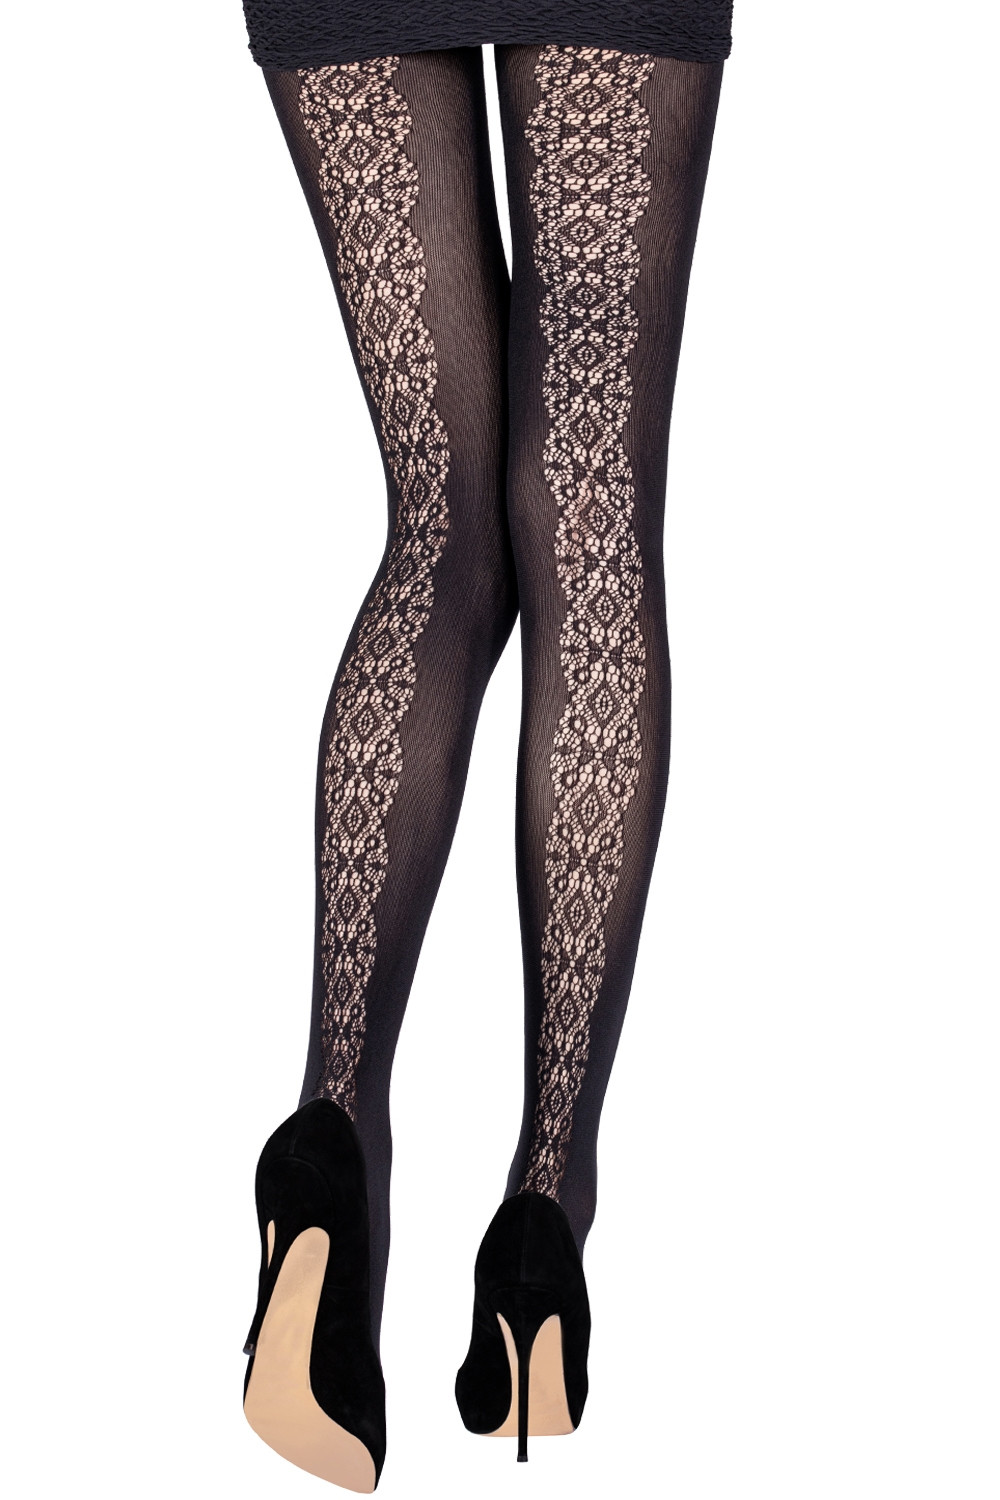 Buy Black Seamless 60 Denier Tights One Pack from Next Austria